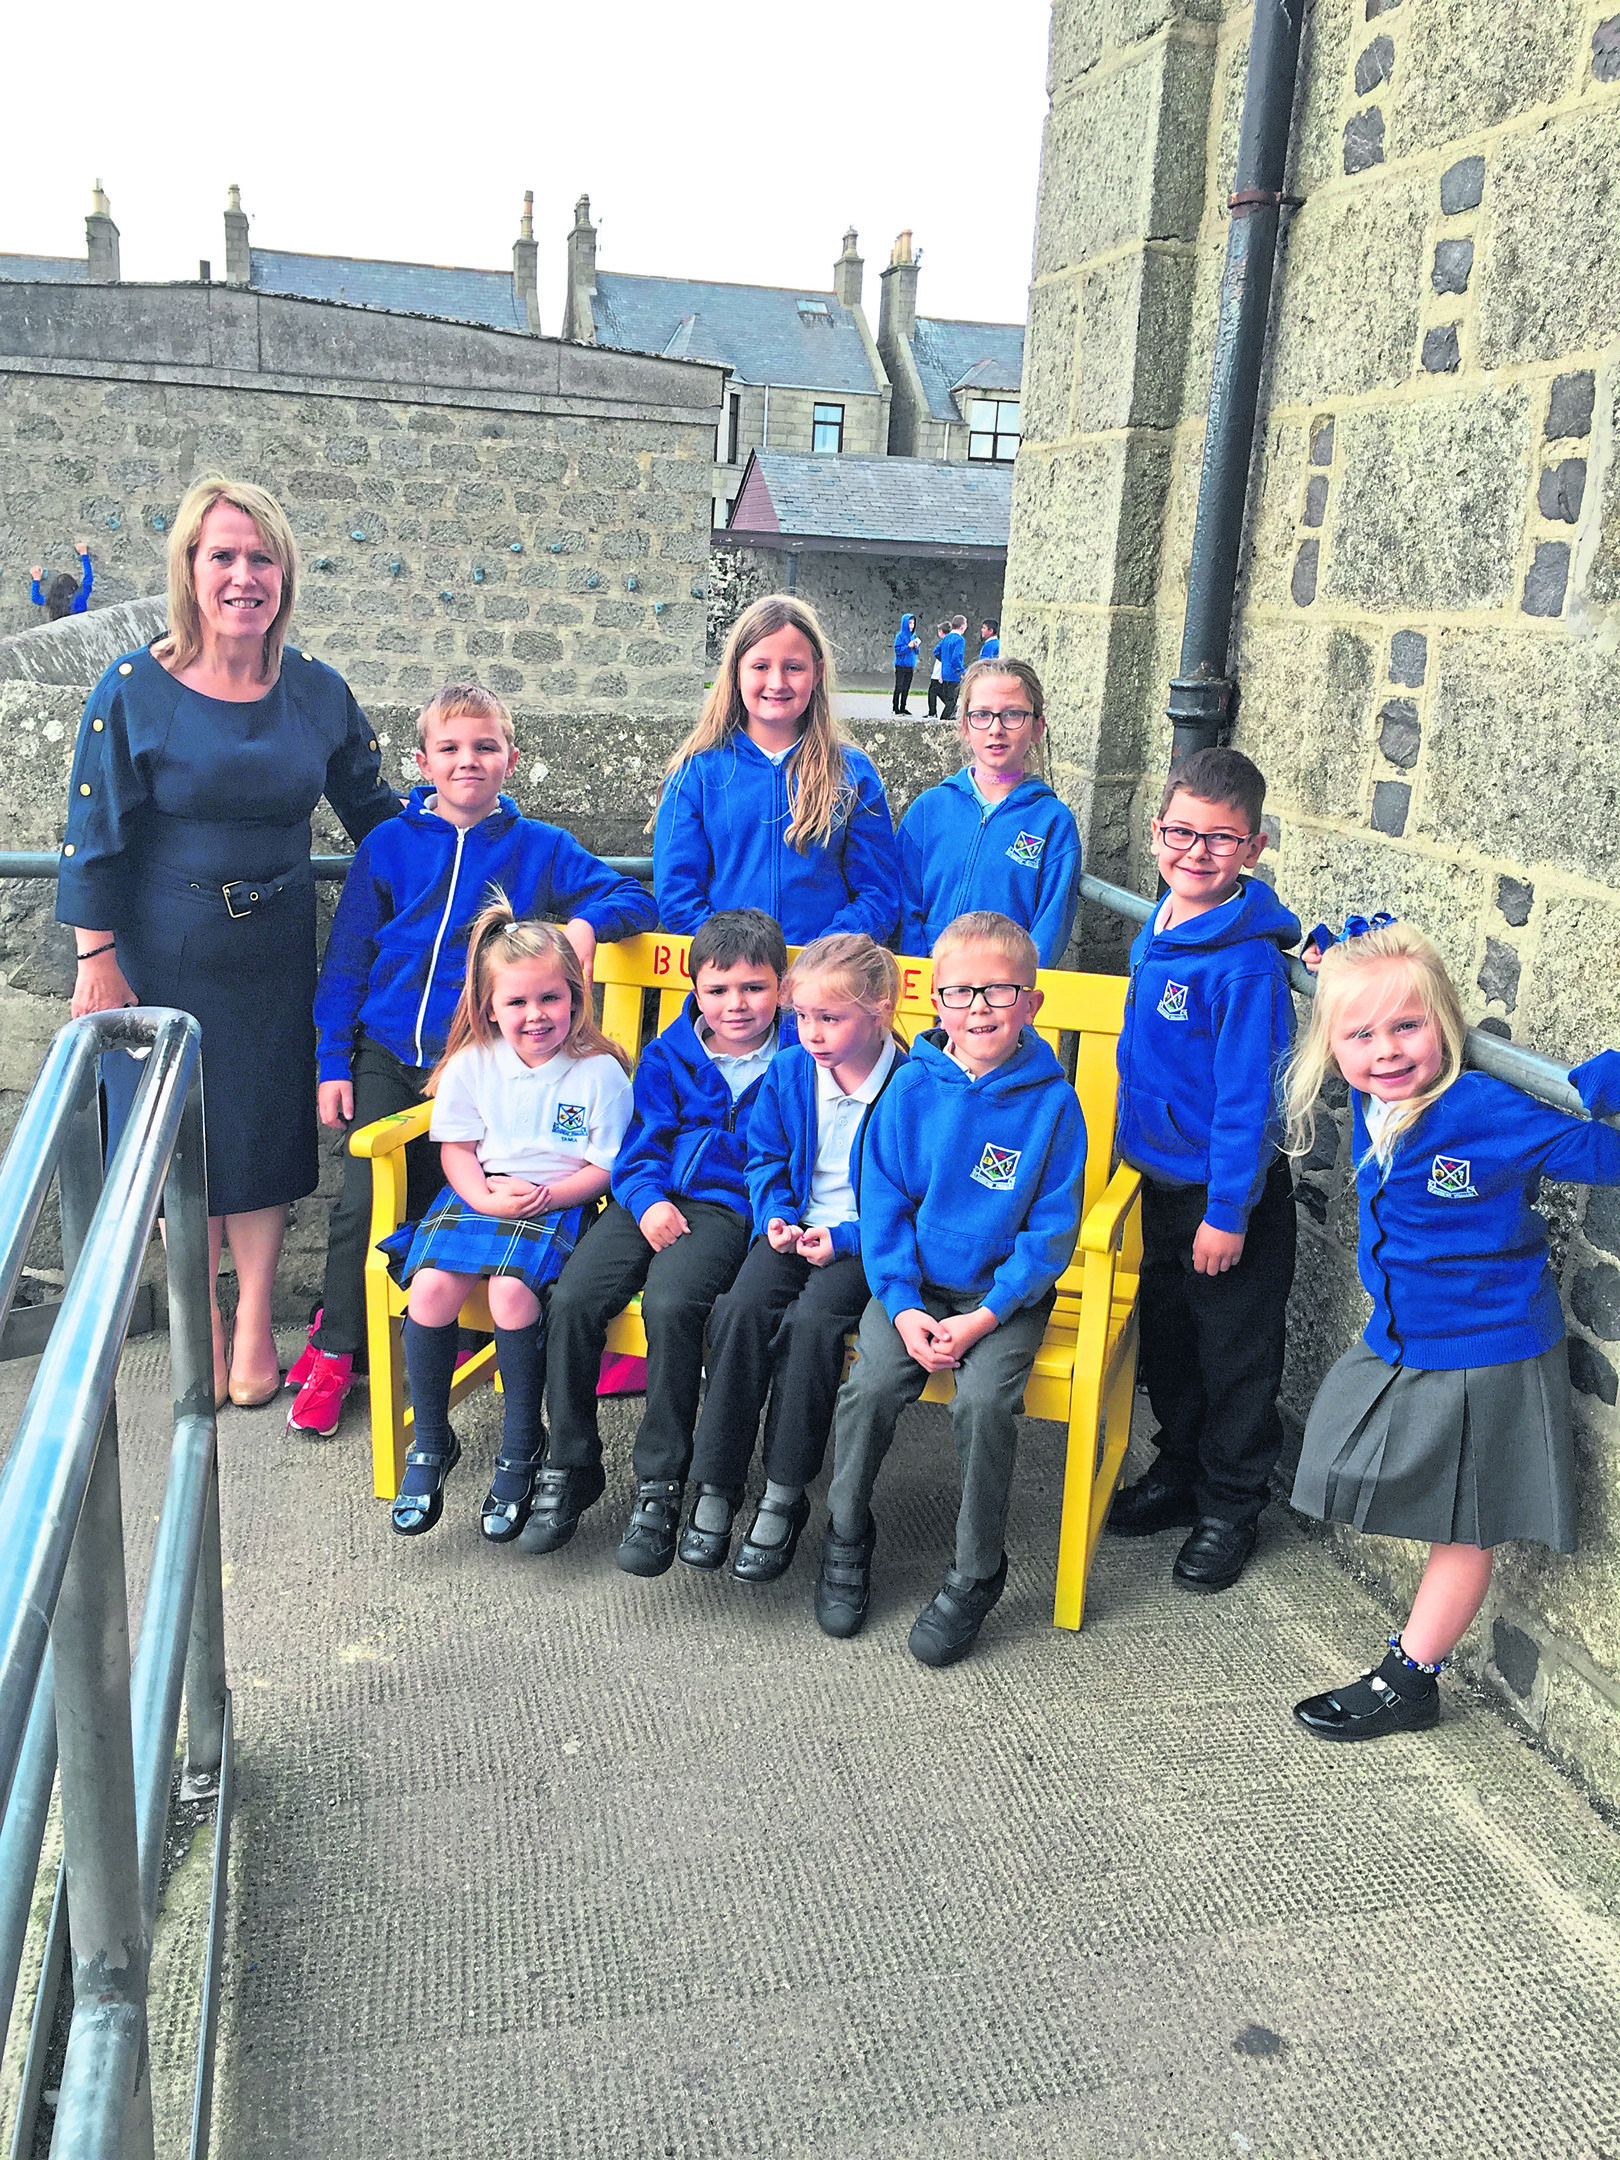 Mrs. Birnie, head teacher at St. Andrew's, along with some of the pupils receiving the bench.